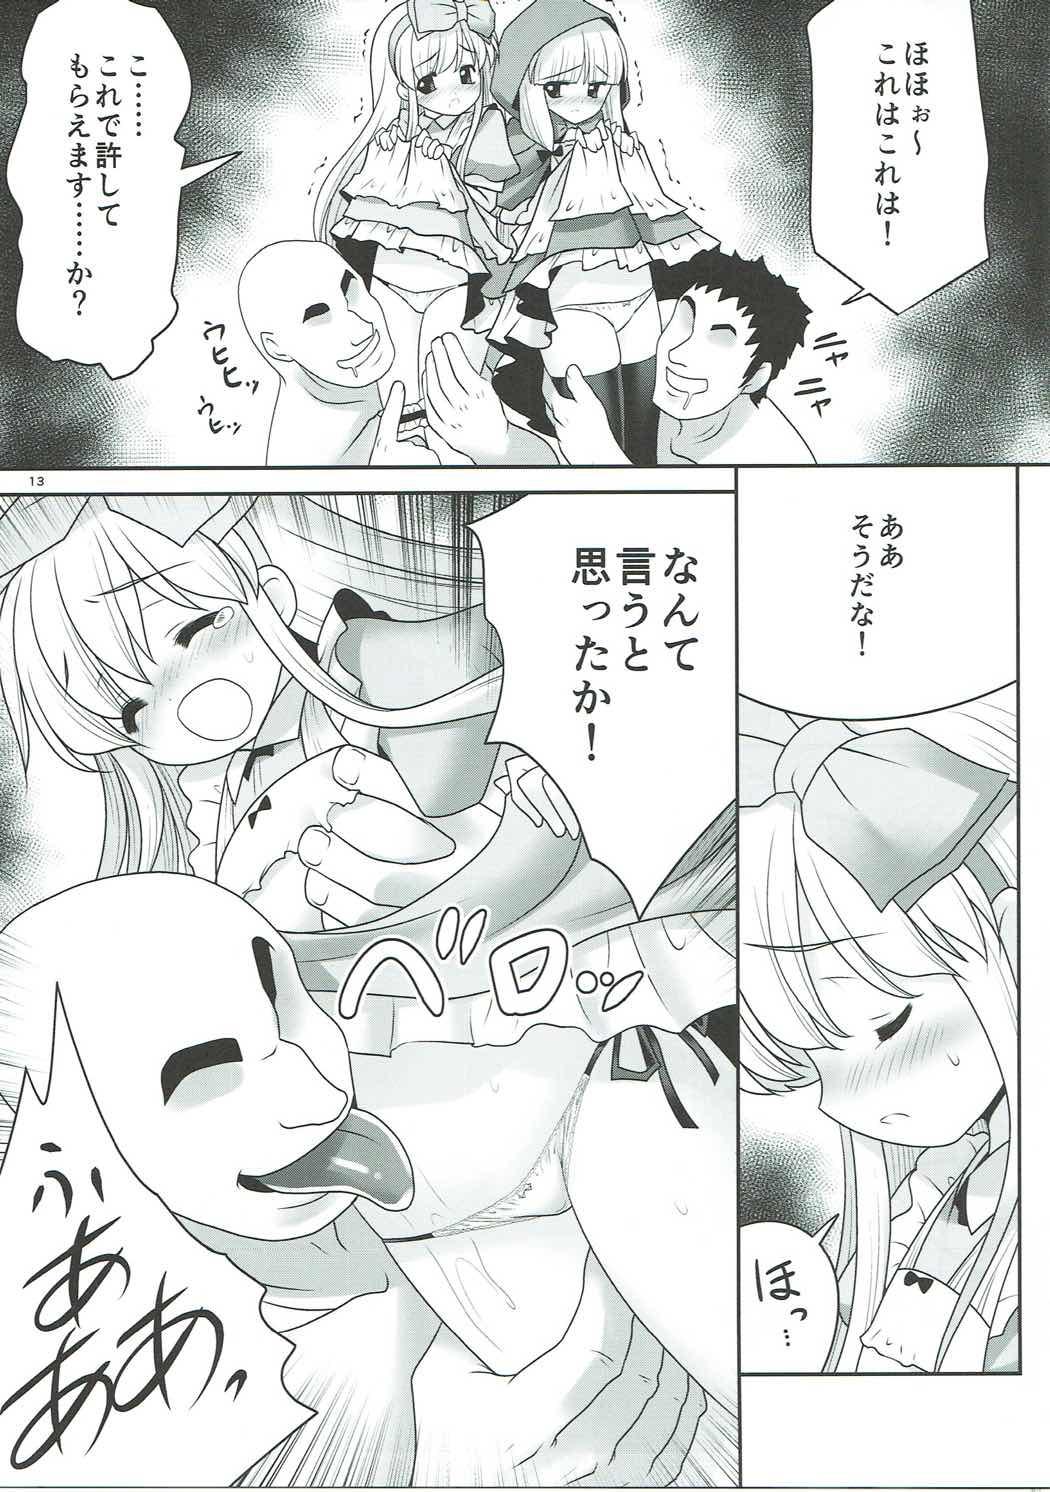 Domina Osoware Nureru Ehon no Shoujo - Little red riding hood Alice in the country of hearts Online - Page 12